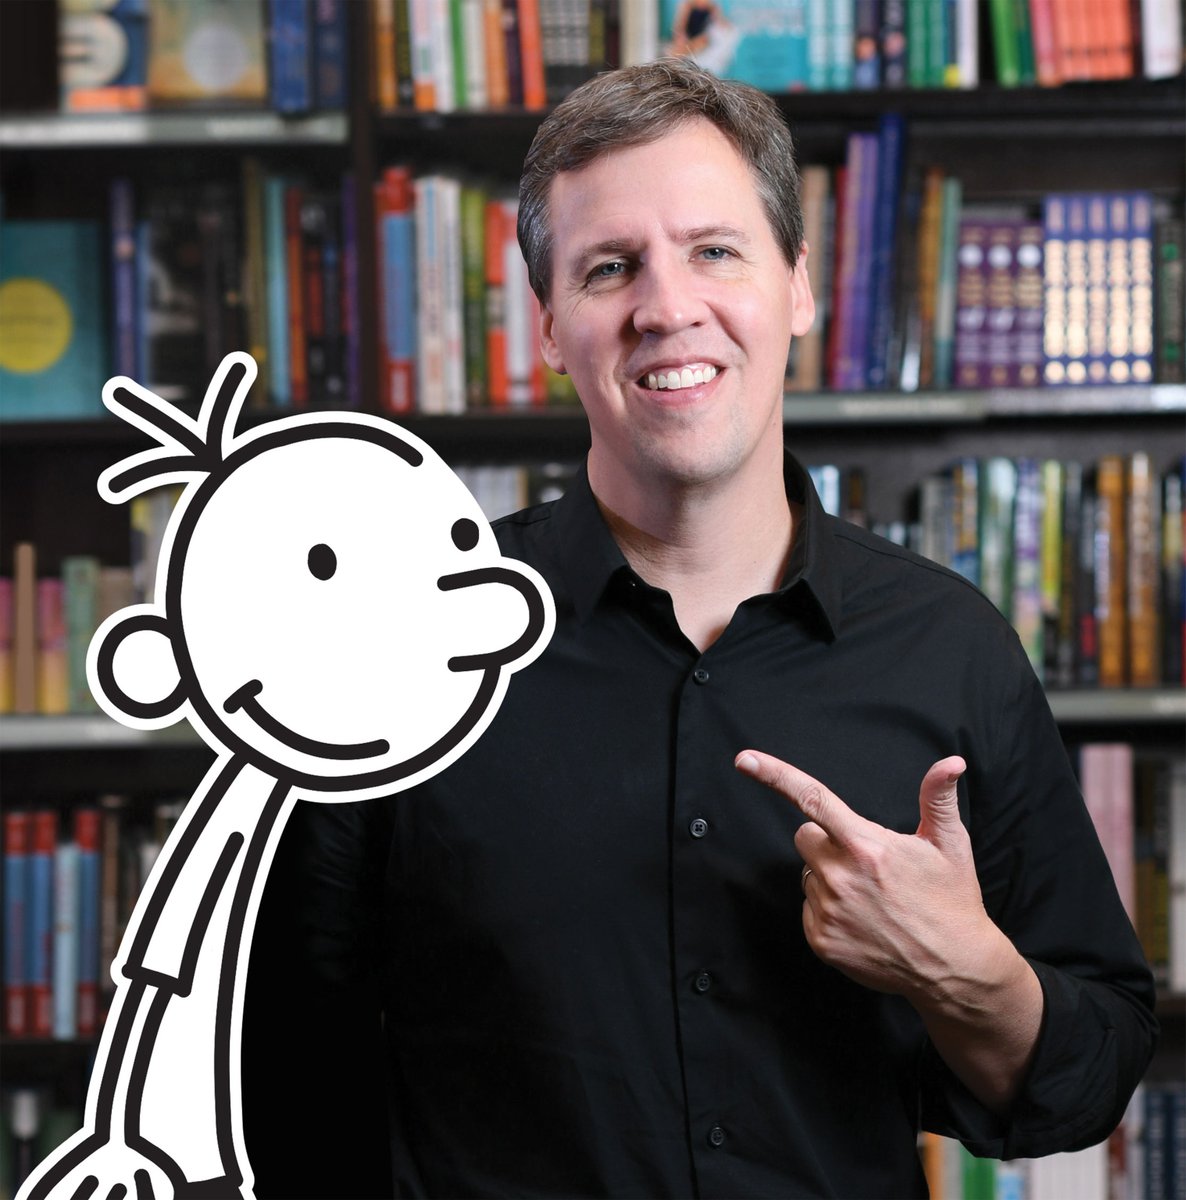 Some exciting news about our upcoming events for May half term and June features in our latest Children and Families Newsletter, including groundbreaking Black British Ballet and bestselling children's author Jeff Kinney. Find out more by signing up now: bit.ly/4bdWPwY